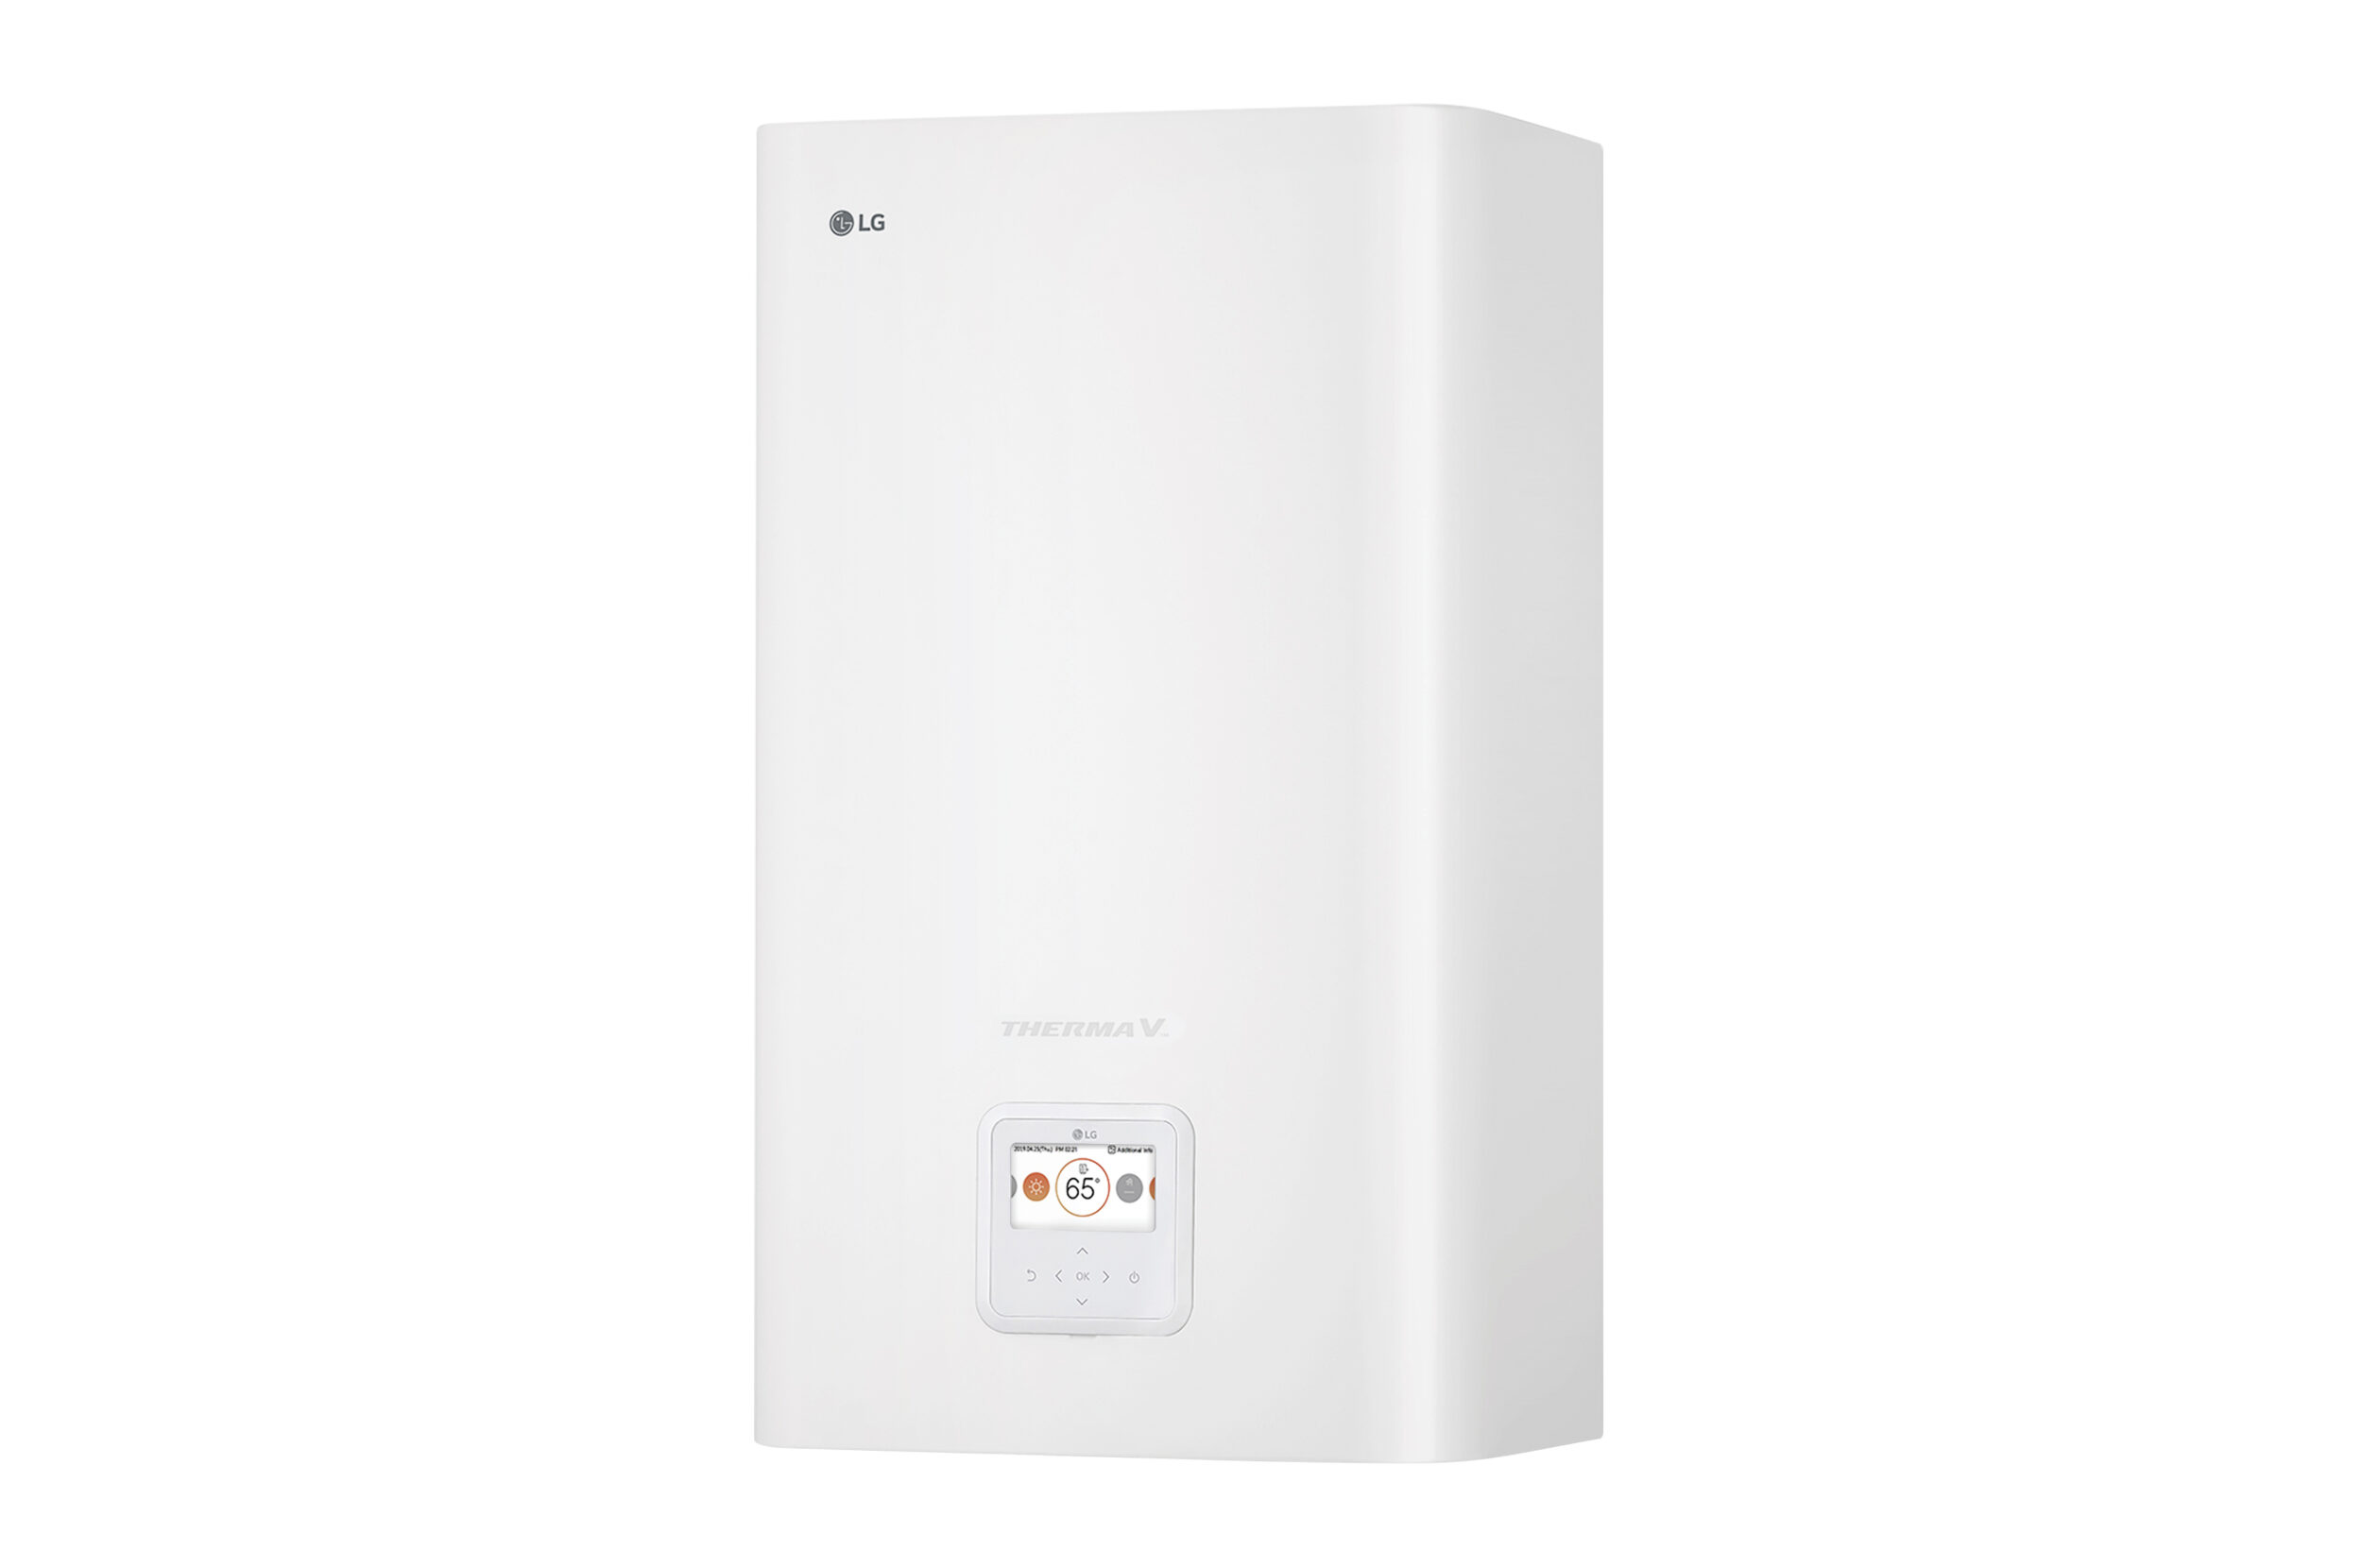 LG launches new Wall Mounted Hydro Kit for domestic hot water